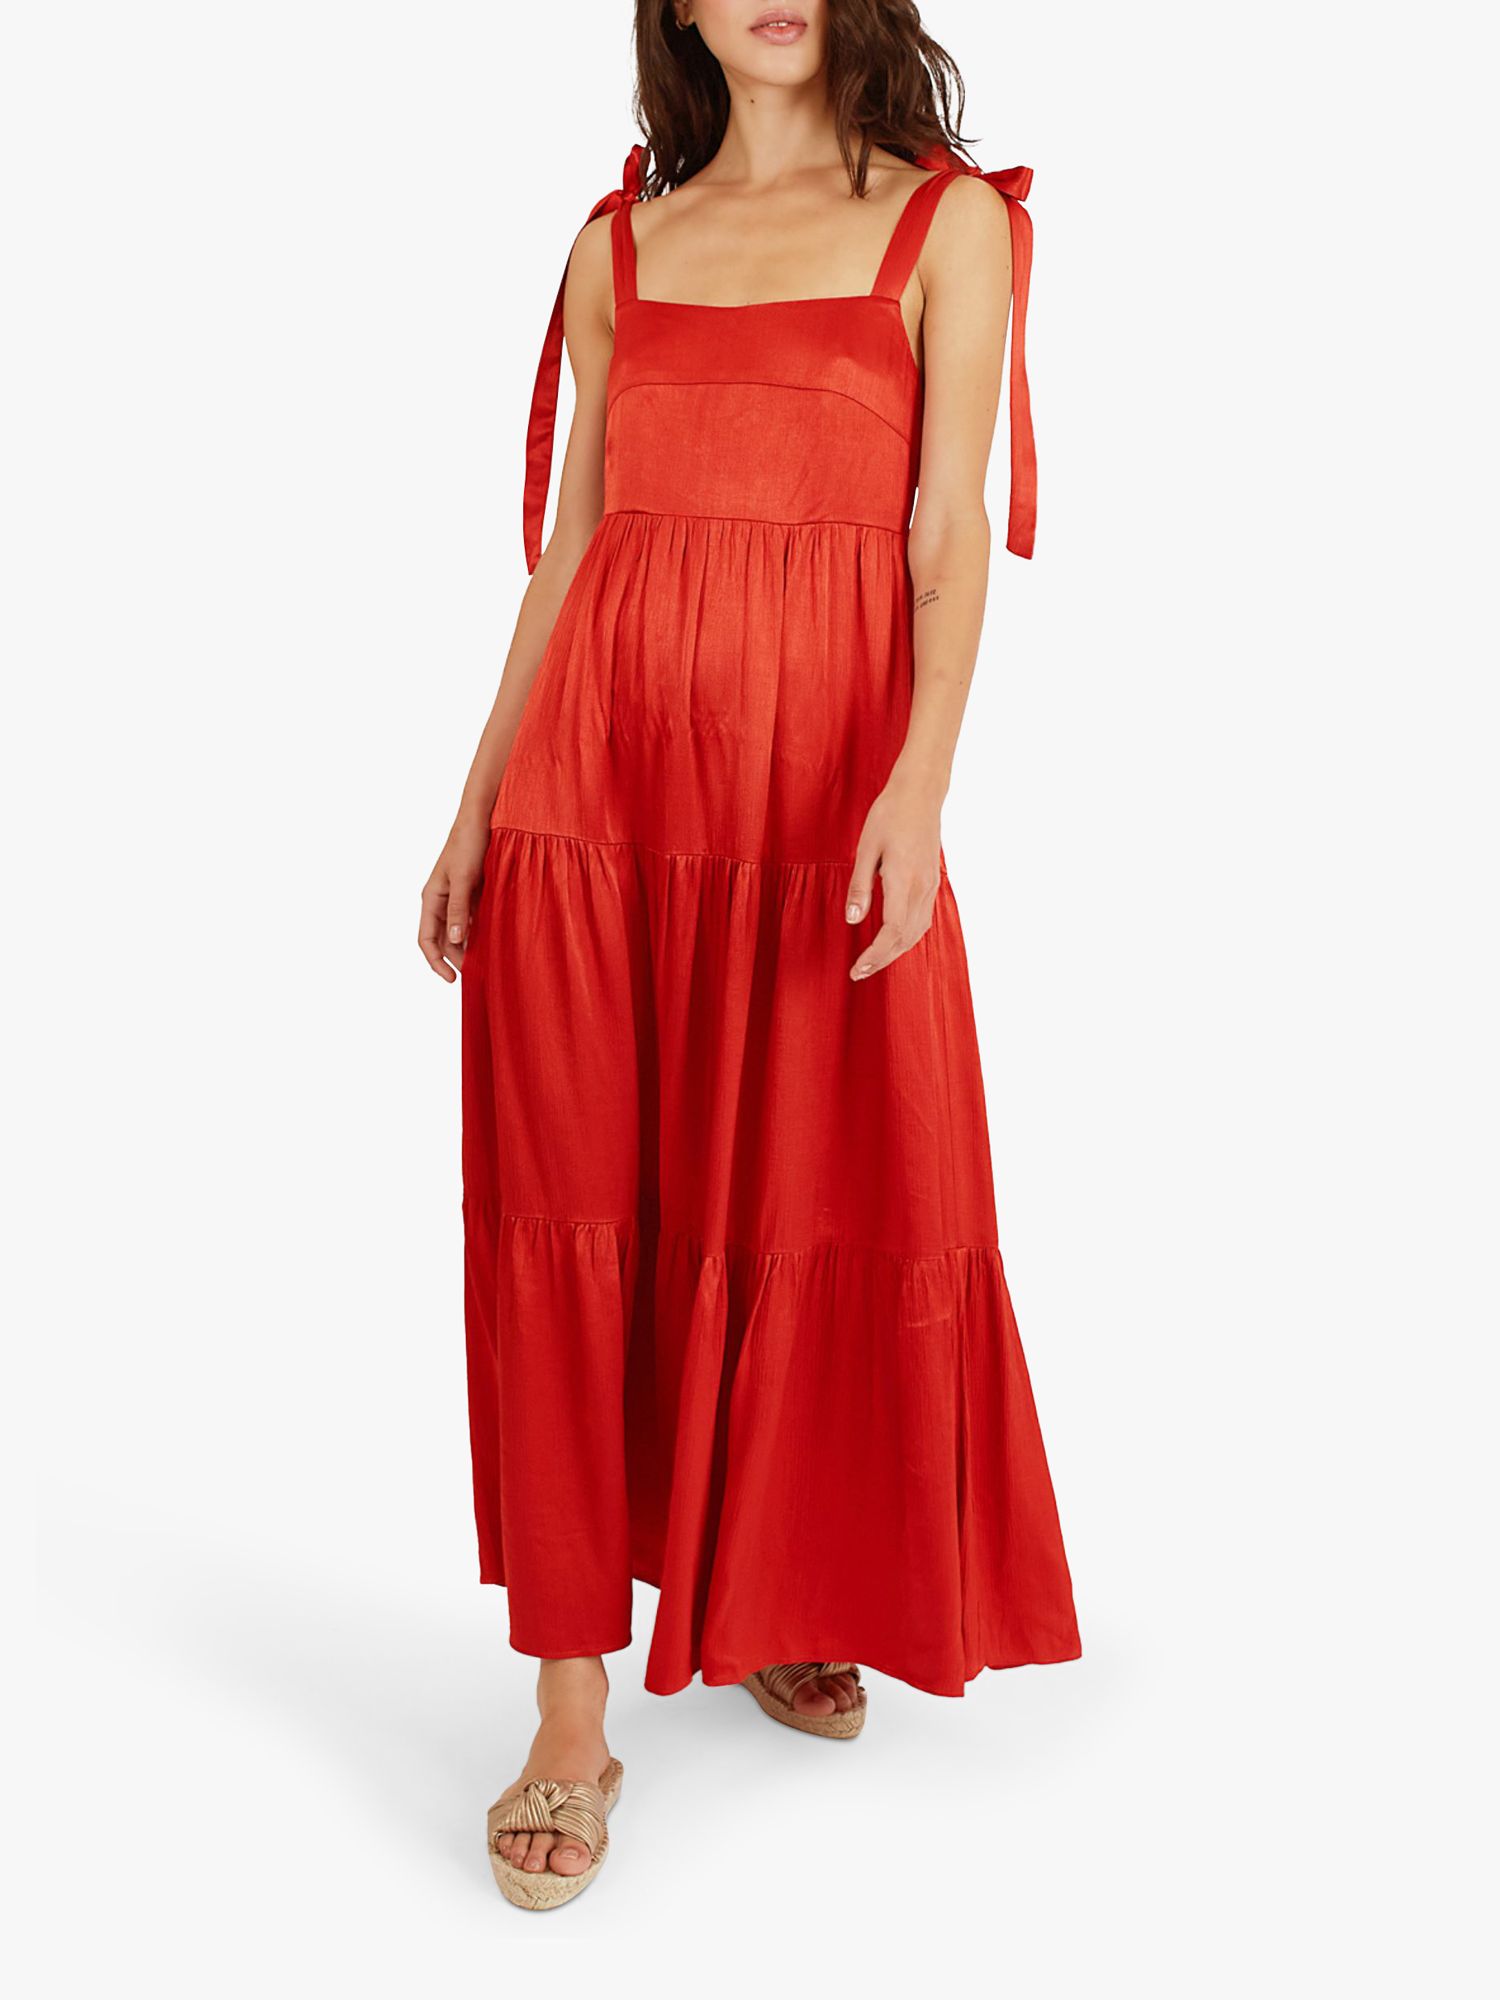 Traffic People Breathless Lily Tiered Maxi Dress, Rust, XS